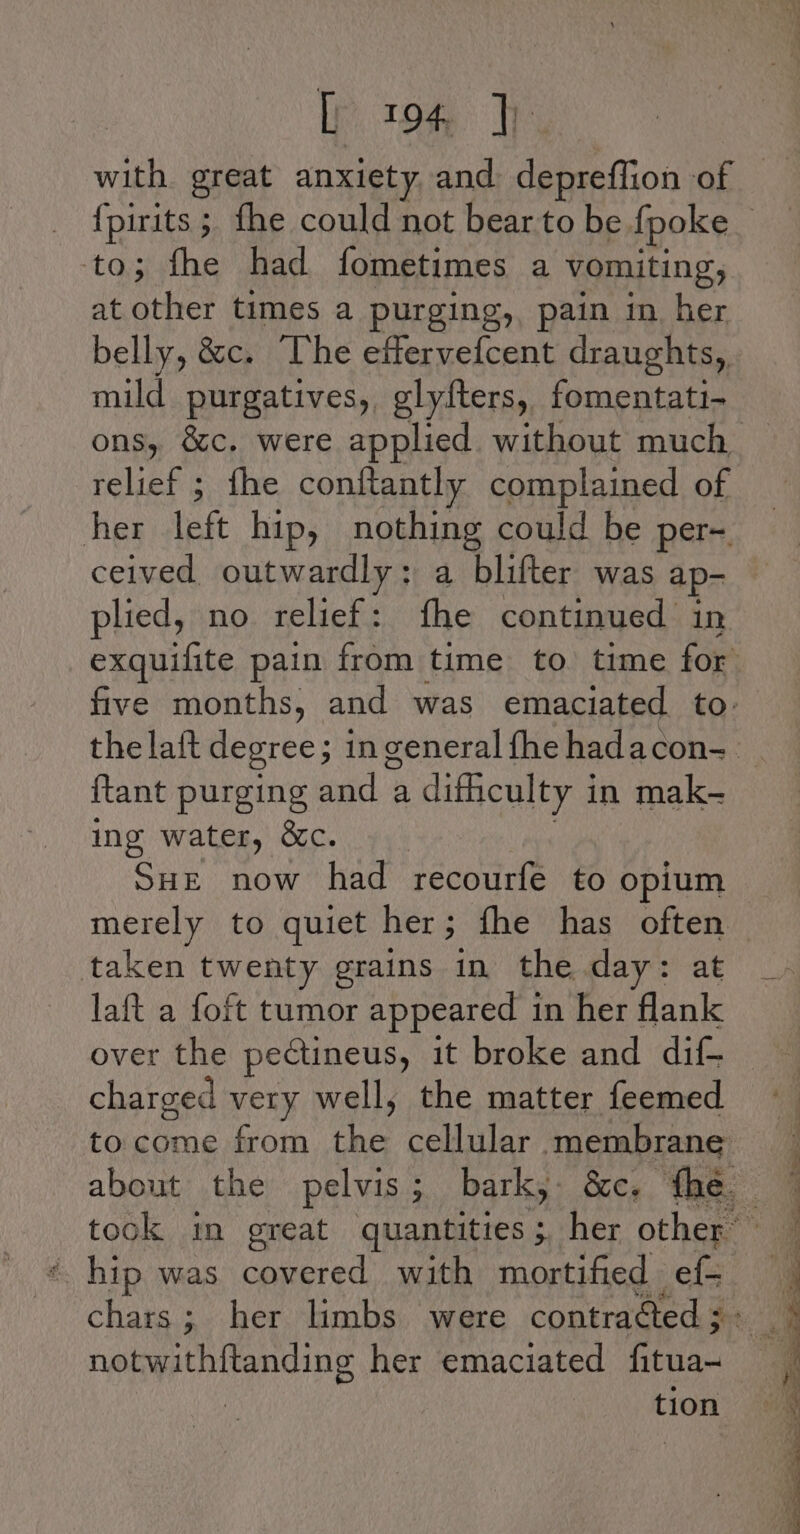 ip tom. with great anxiety and: depreffion of to; fhe had fometimes a vomiting, at other times a purging, pain in her belly, &amp;c. “The effervefcent draughts, mild purgatives,, glyfters, fomentati- relief ; fhe conftantly complained of her left hip, nothing could be per- ceived outwardly: a blifter was ap- plied, no relief: fhe continued in {tant purging ad a difheulty i in mak- ing water, &amp;c. Sue now had recourfe to opium merely to quiet her; fhe has sbi taken ey grains in the day: laft a foft tumor appeared 1 in her decks over the pectineus, it broke and dif- charged very well, the matter feemed to come from ne cellular membrane hip was covered with mortified -ef= chars; her limbs were contraéted ; » notwithftanding her emaciated fitua- | tion ae